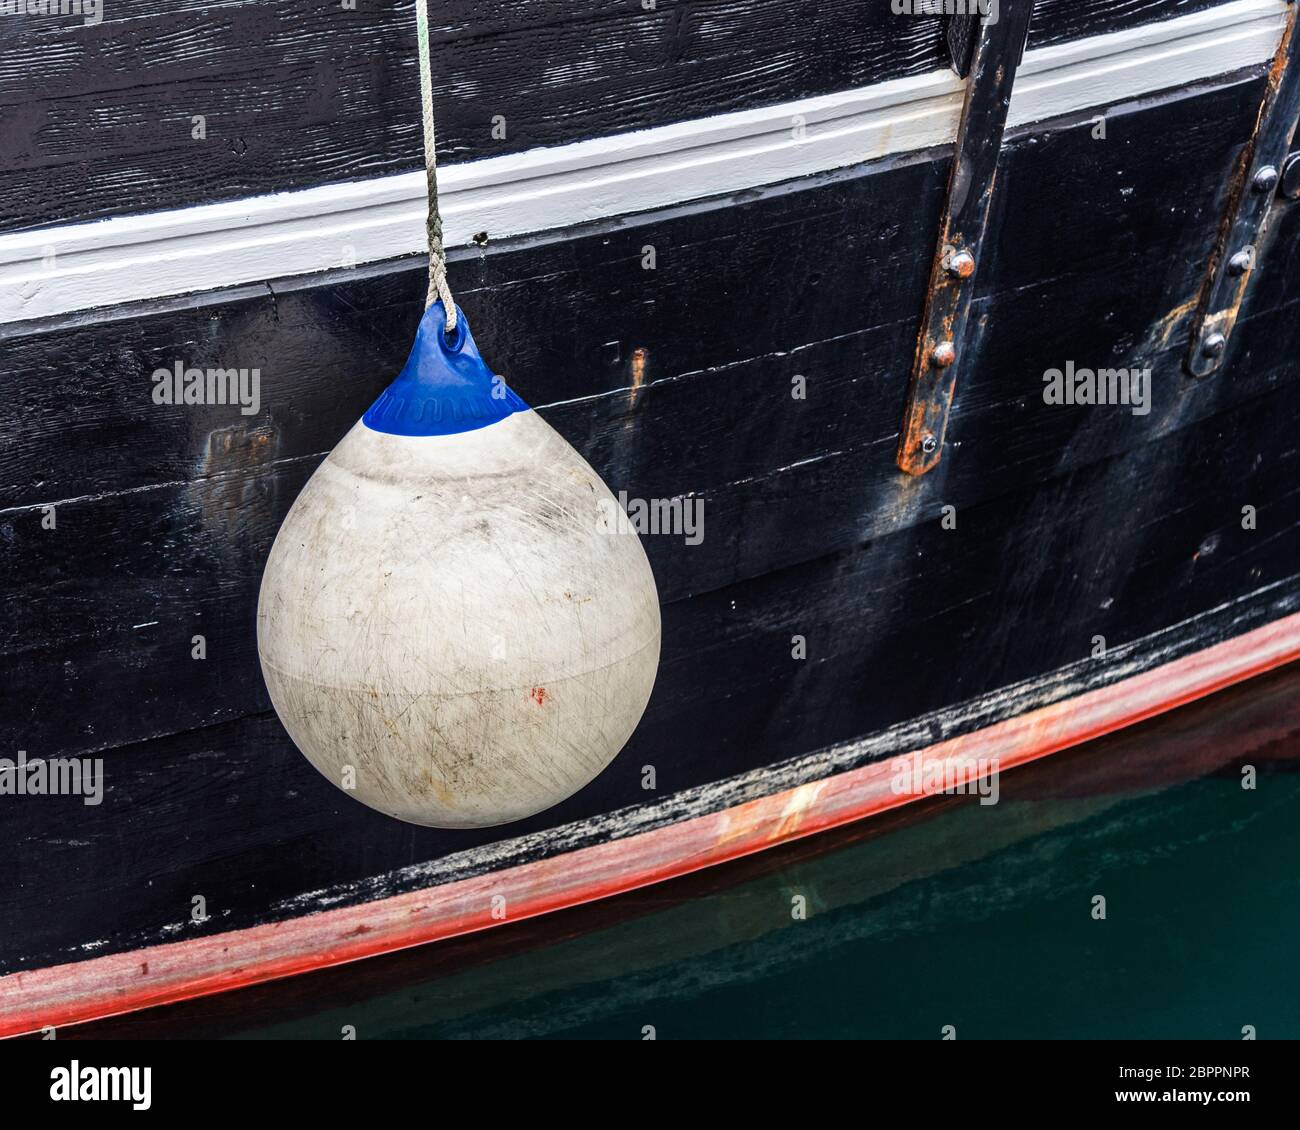 White buoy hanging on a black hull boat Stock Photo